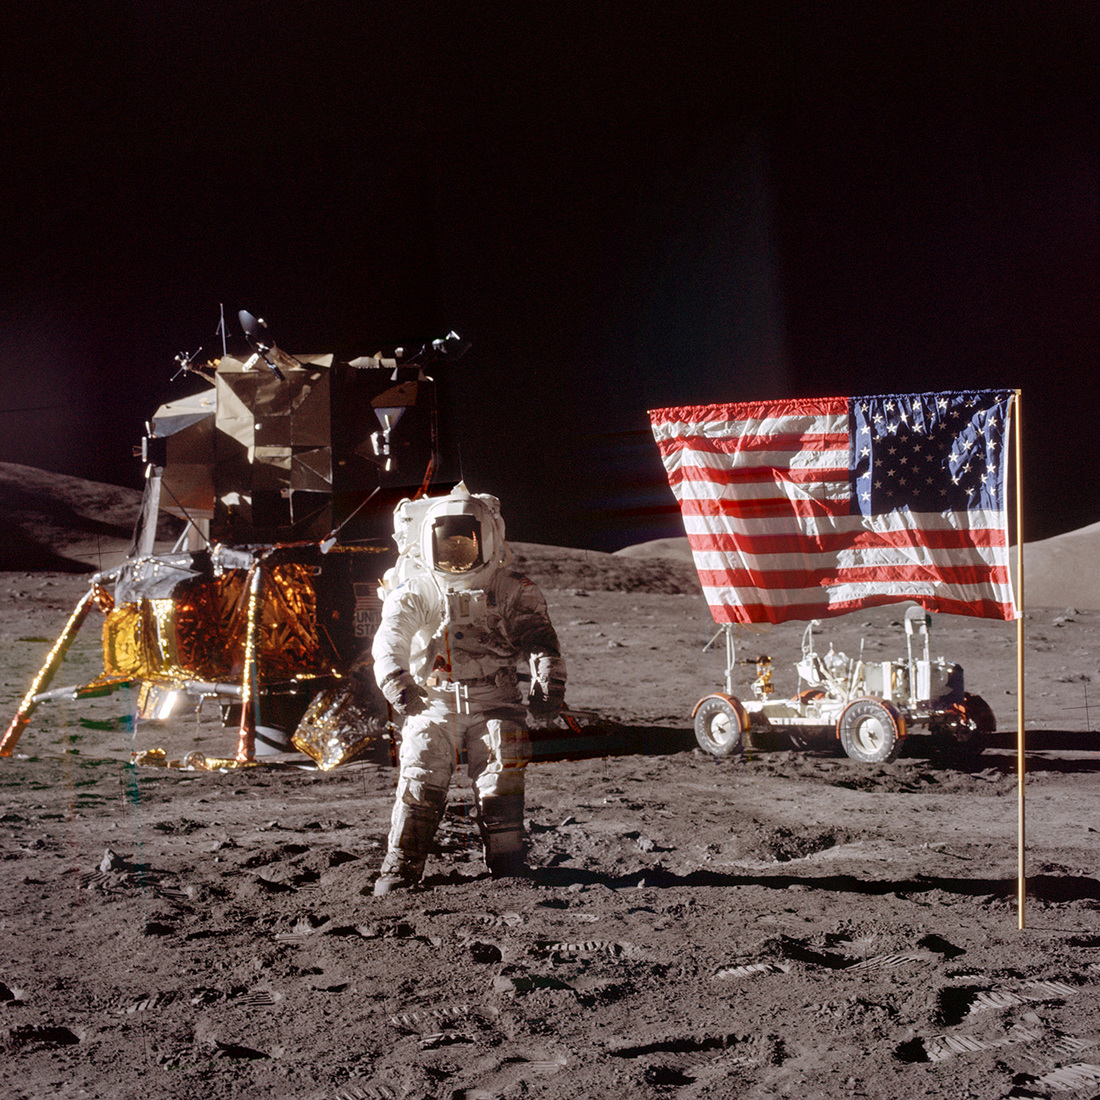 Apollo 17 handheld image of astronaut Jack Schmitt standing to the left of the U.S. flag, with the LM, LRV and the MESA in the background.